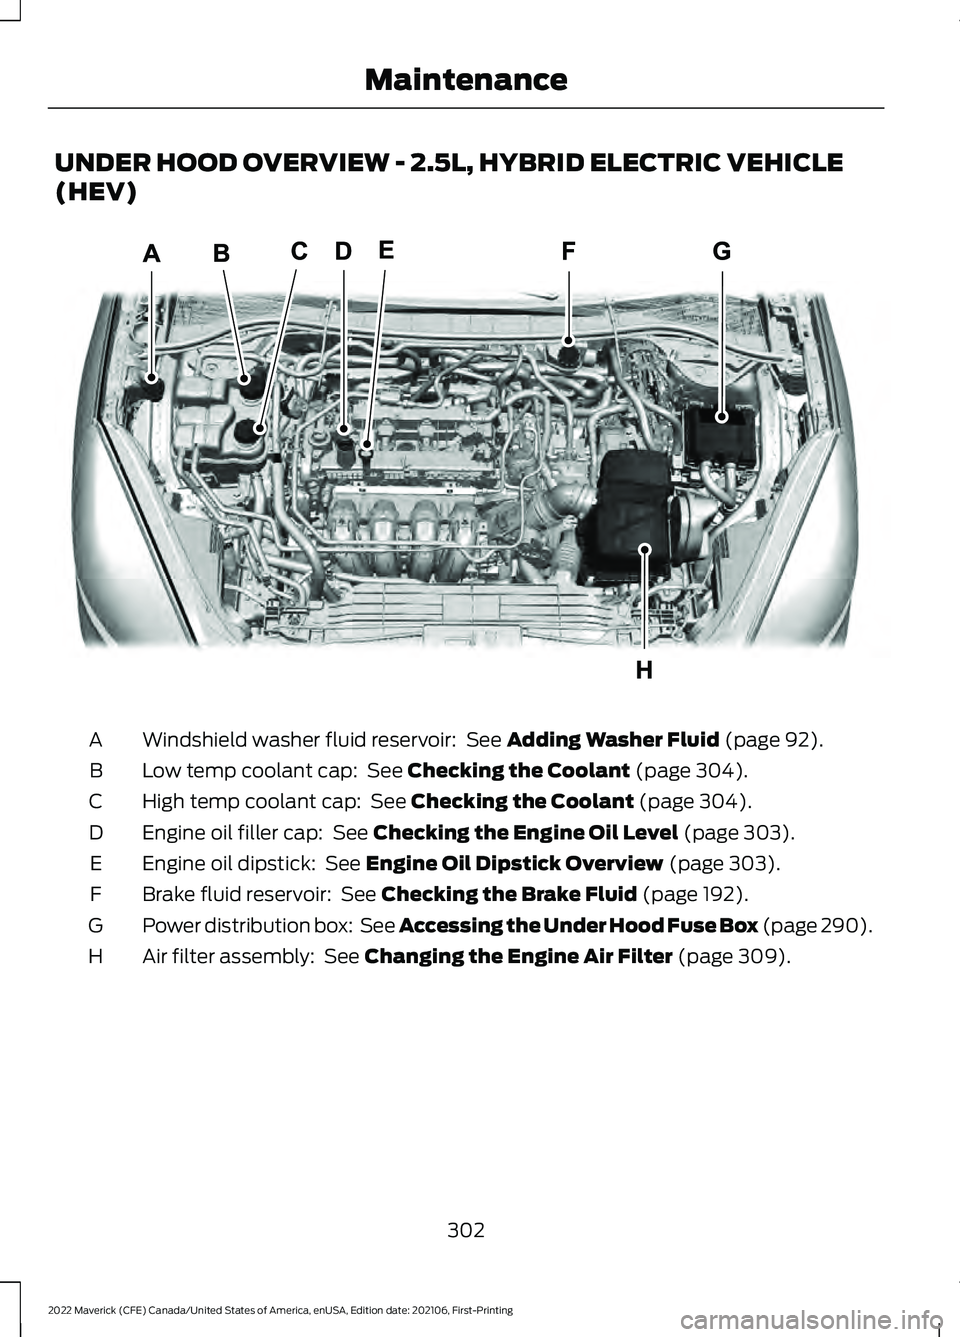 FORD MAVERICK 2022  Owners Manual UNDER HOOD OVERVIEW - 2.5L, HYBRID ELECTRIC VEHICLE
(HEV)
Windshield washer fluid reservoir:  See Adding Washer Fluid (page 92).
A
Low temp coolant cap: 
 See Checking the Coolant (page 304).
B
High t